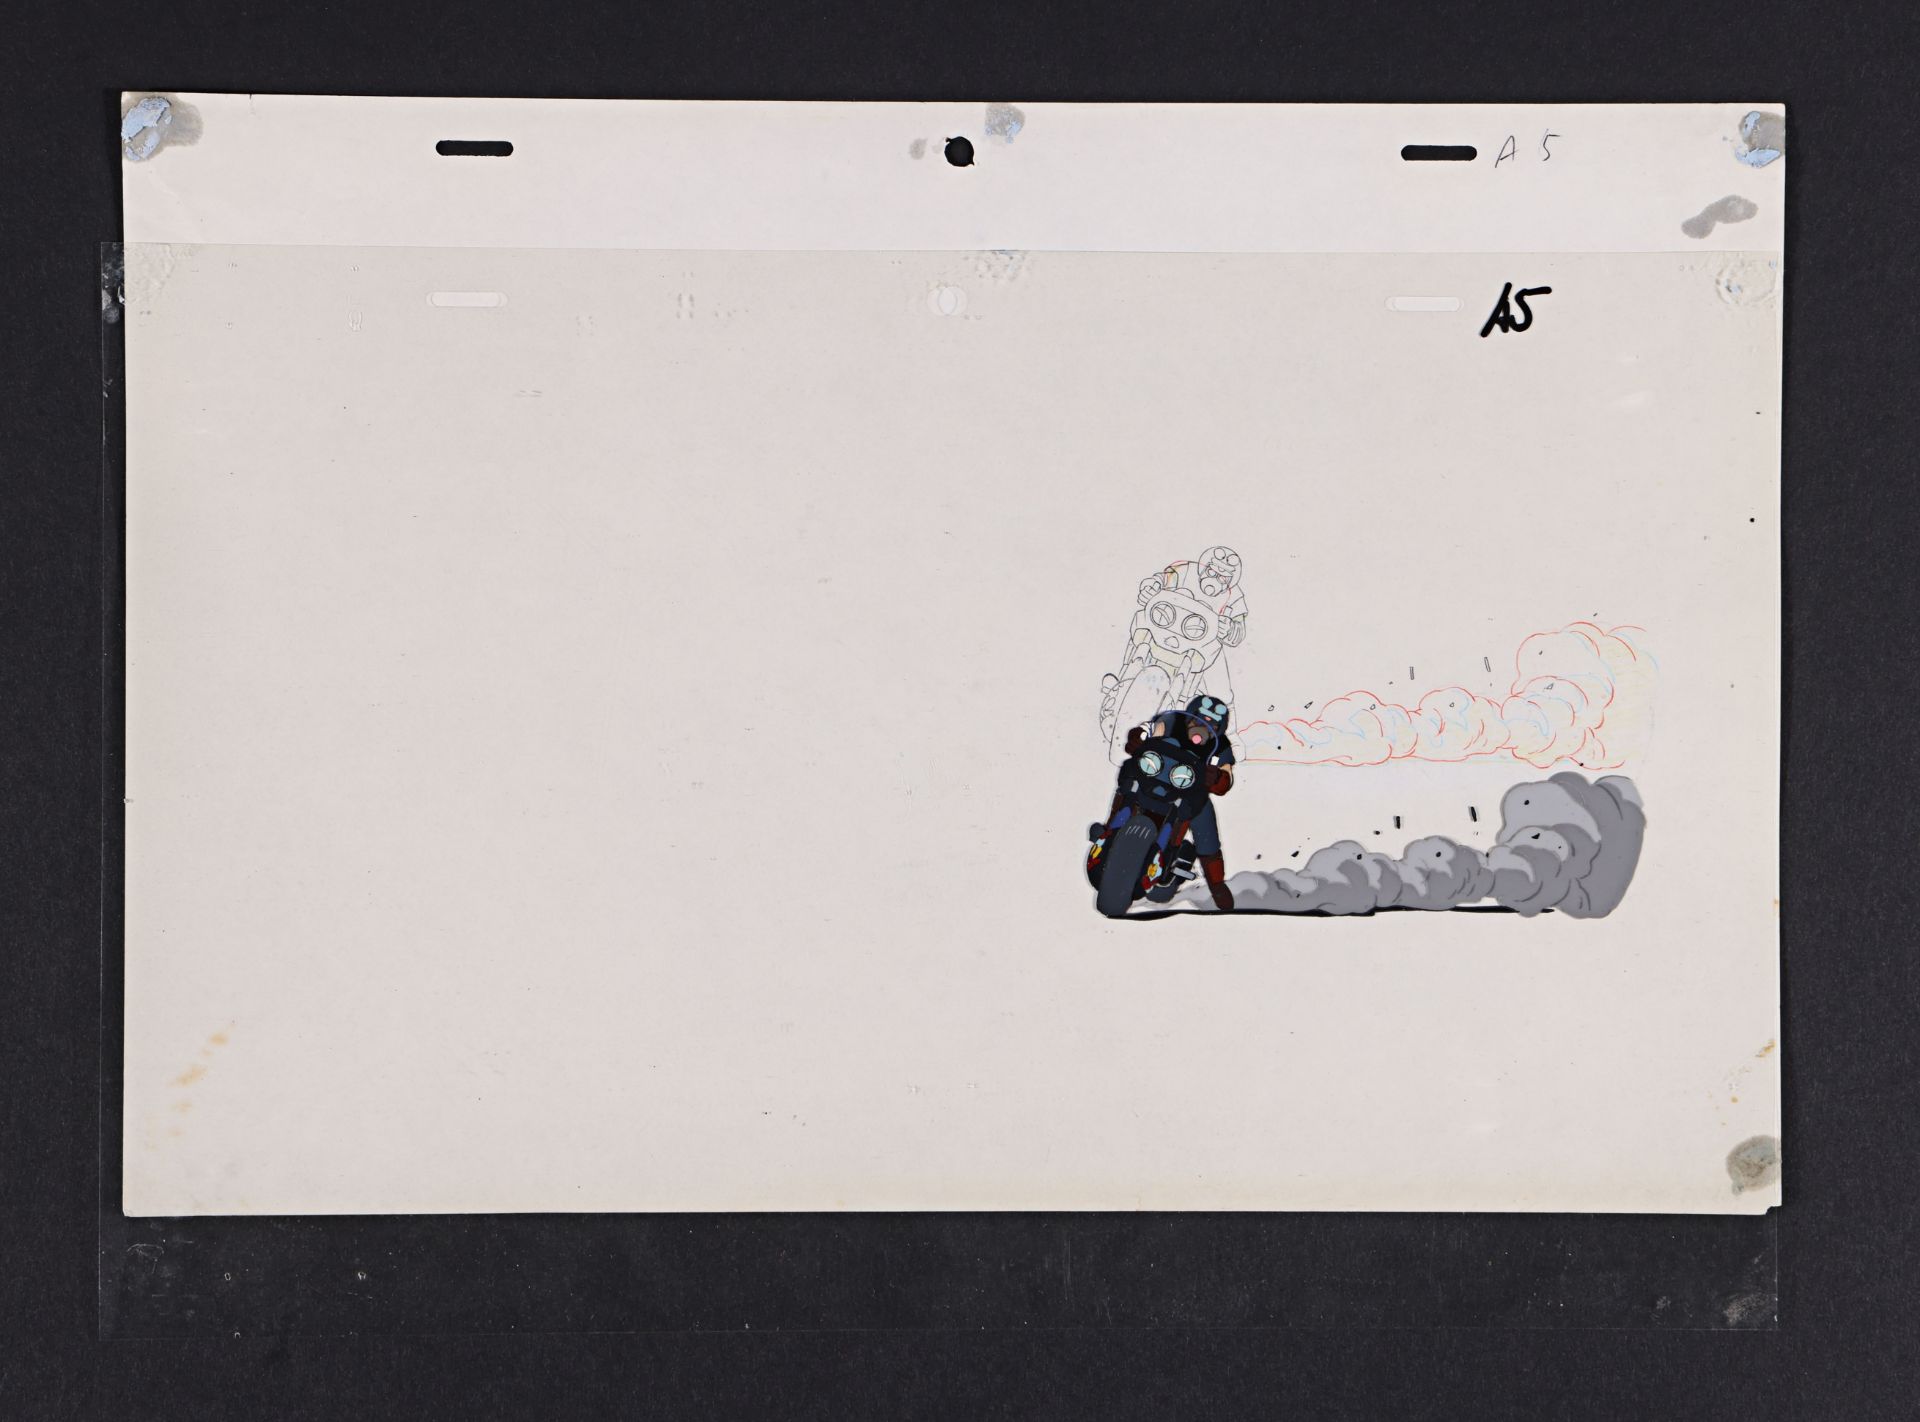 AKIRA (1988) - Five Original Hand-Painted Animation Cels with Drawings, 1988 - Image 4 of 5